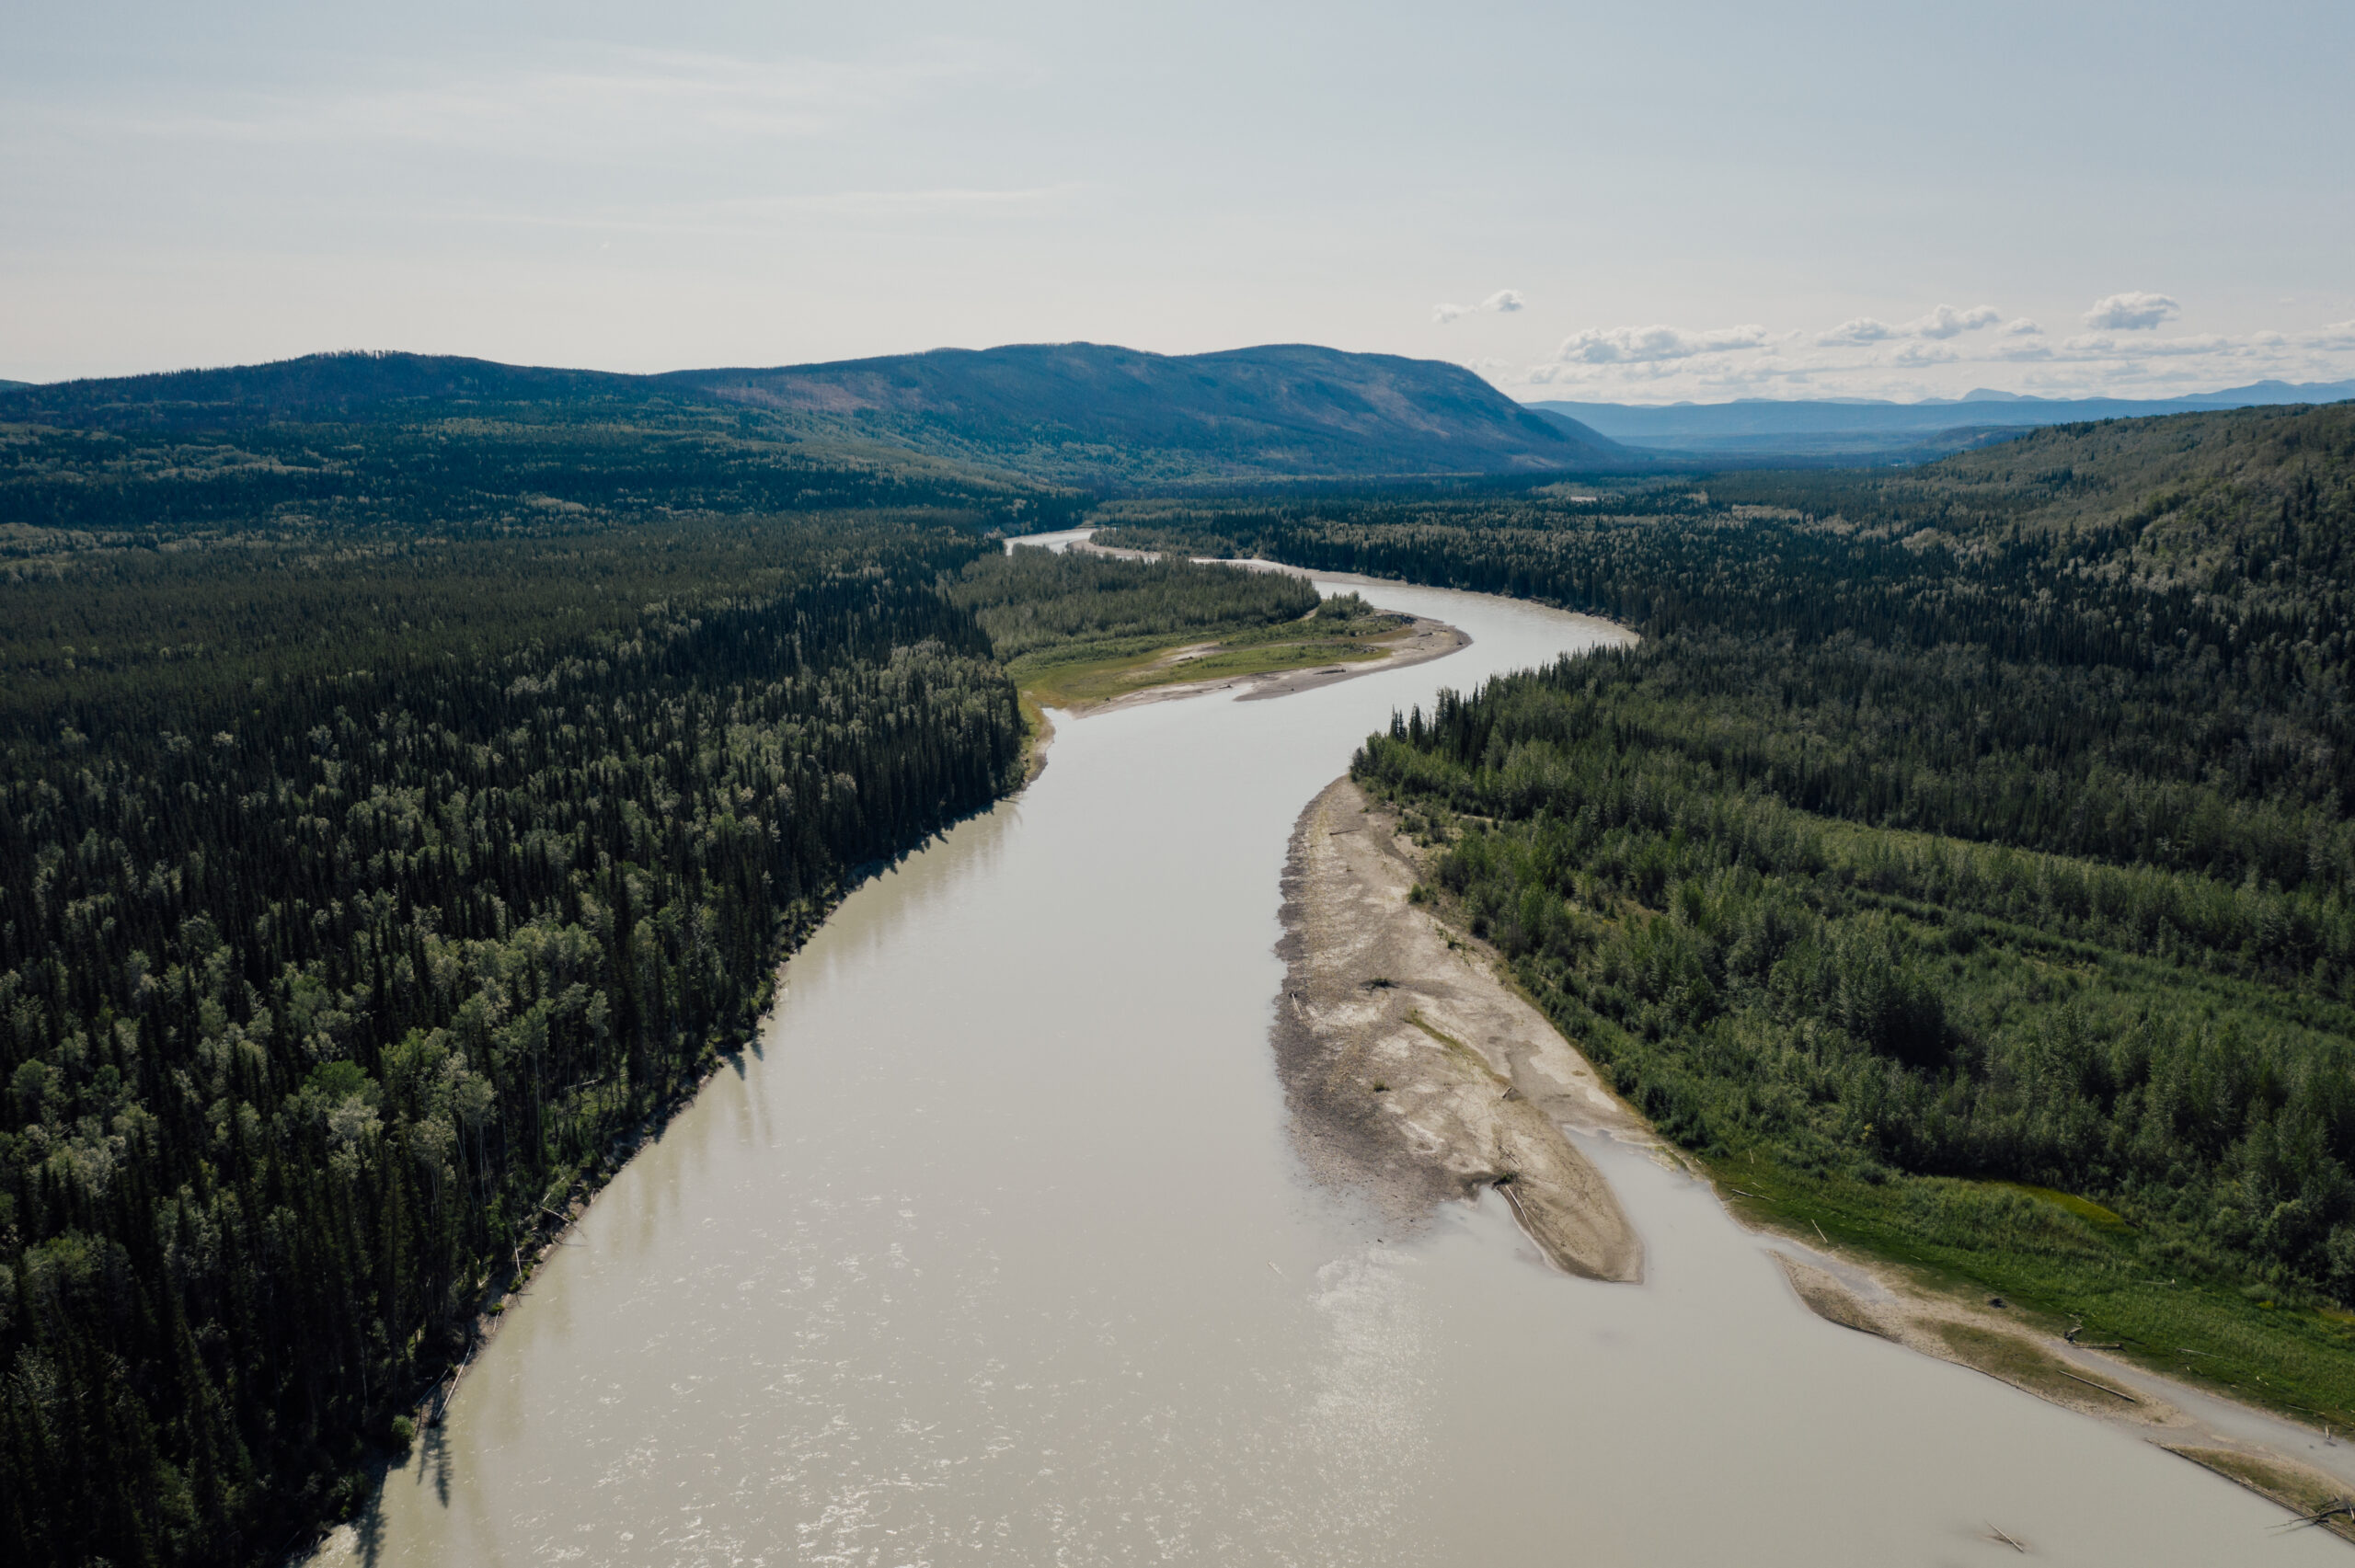 A photo of the Kechika River from the air, running through a forested area, with a mountain in the background. The river runs through the Dene K’éh Kusān Indigenous Protected and Conserved Area